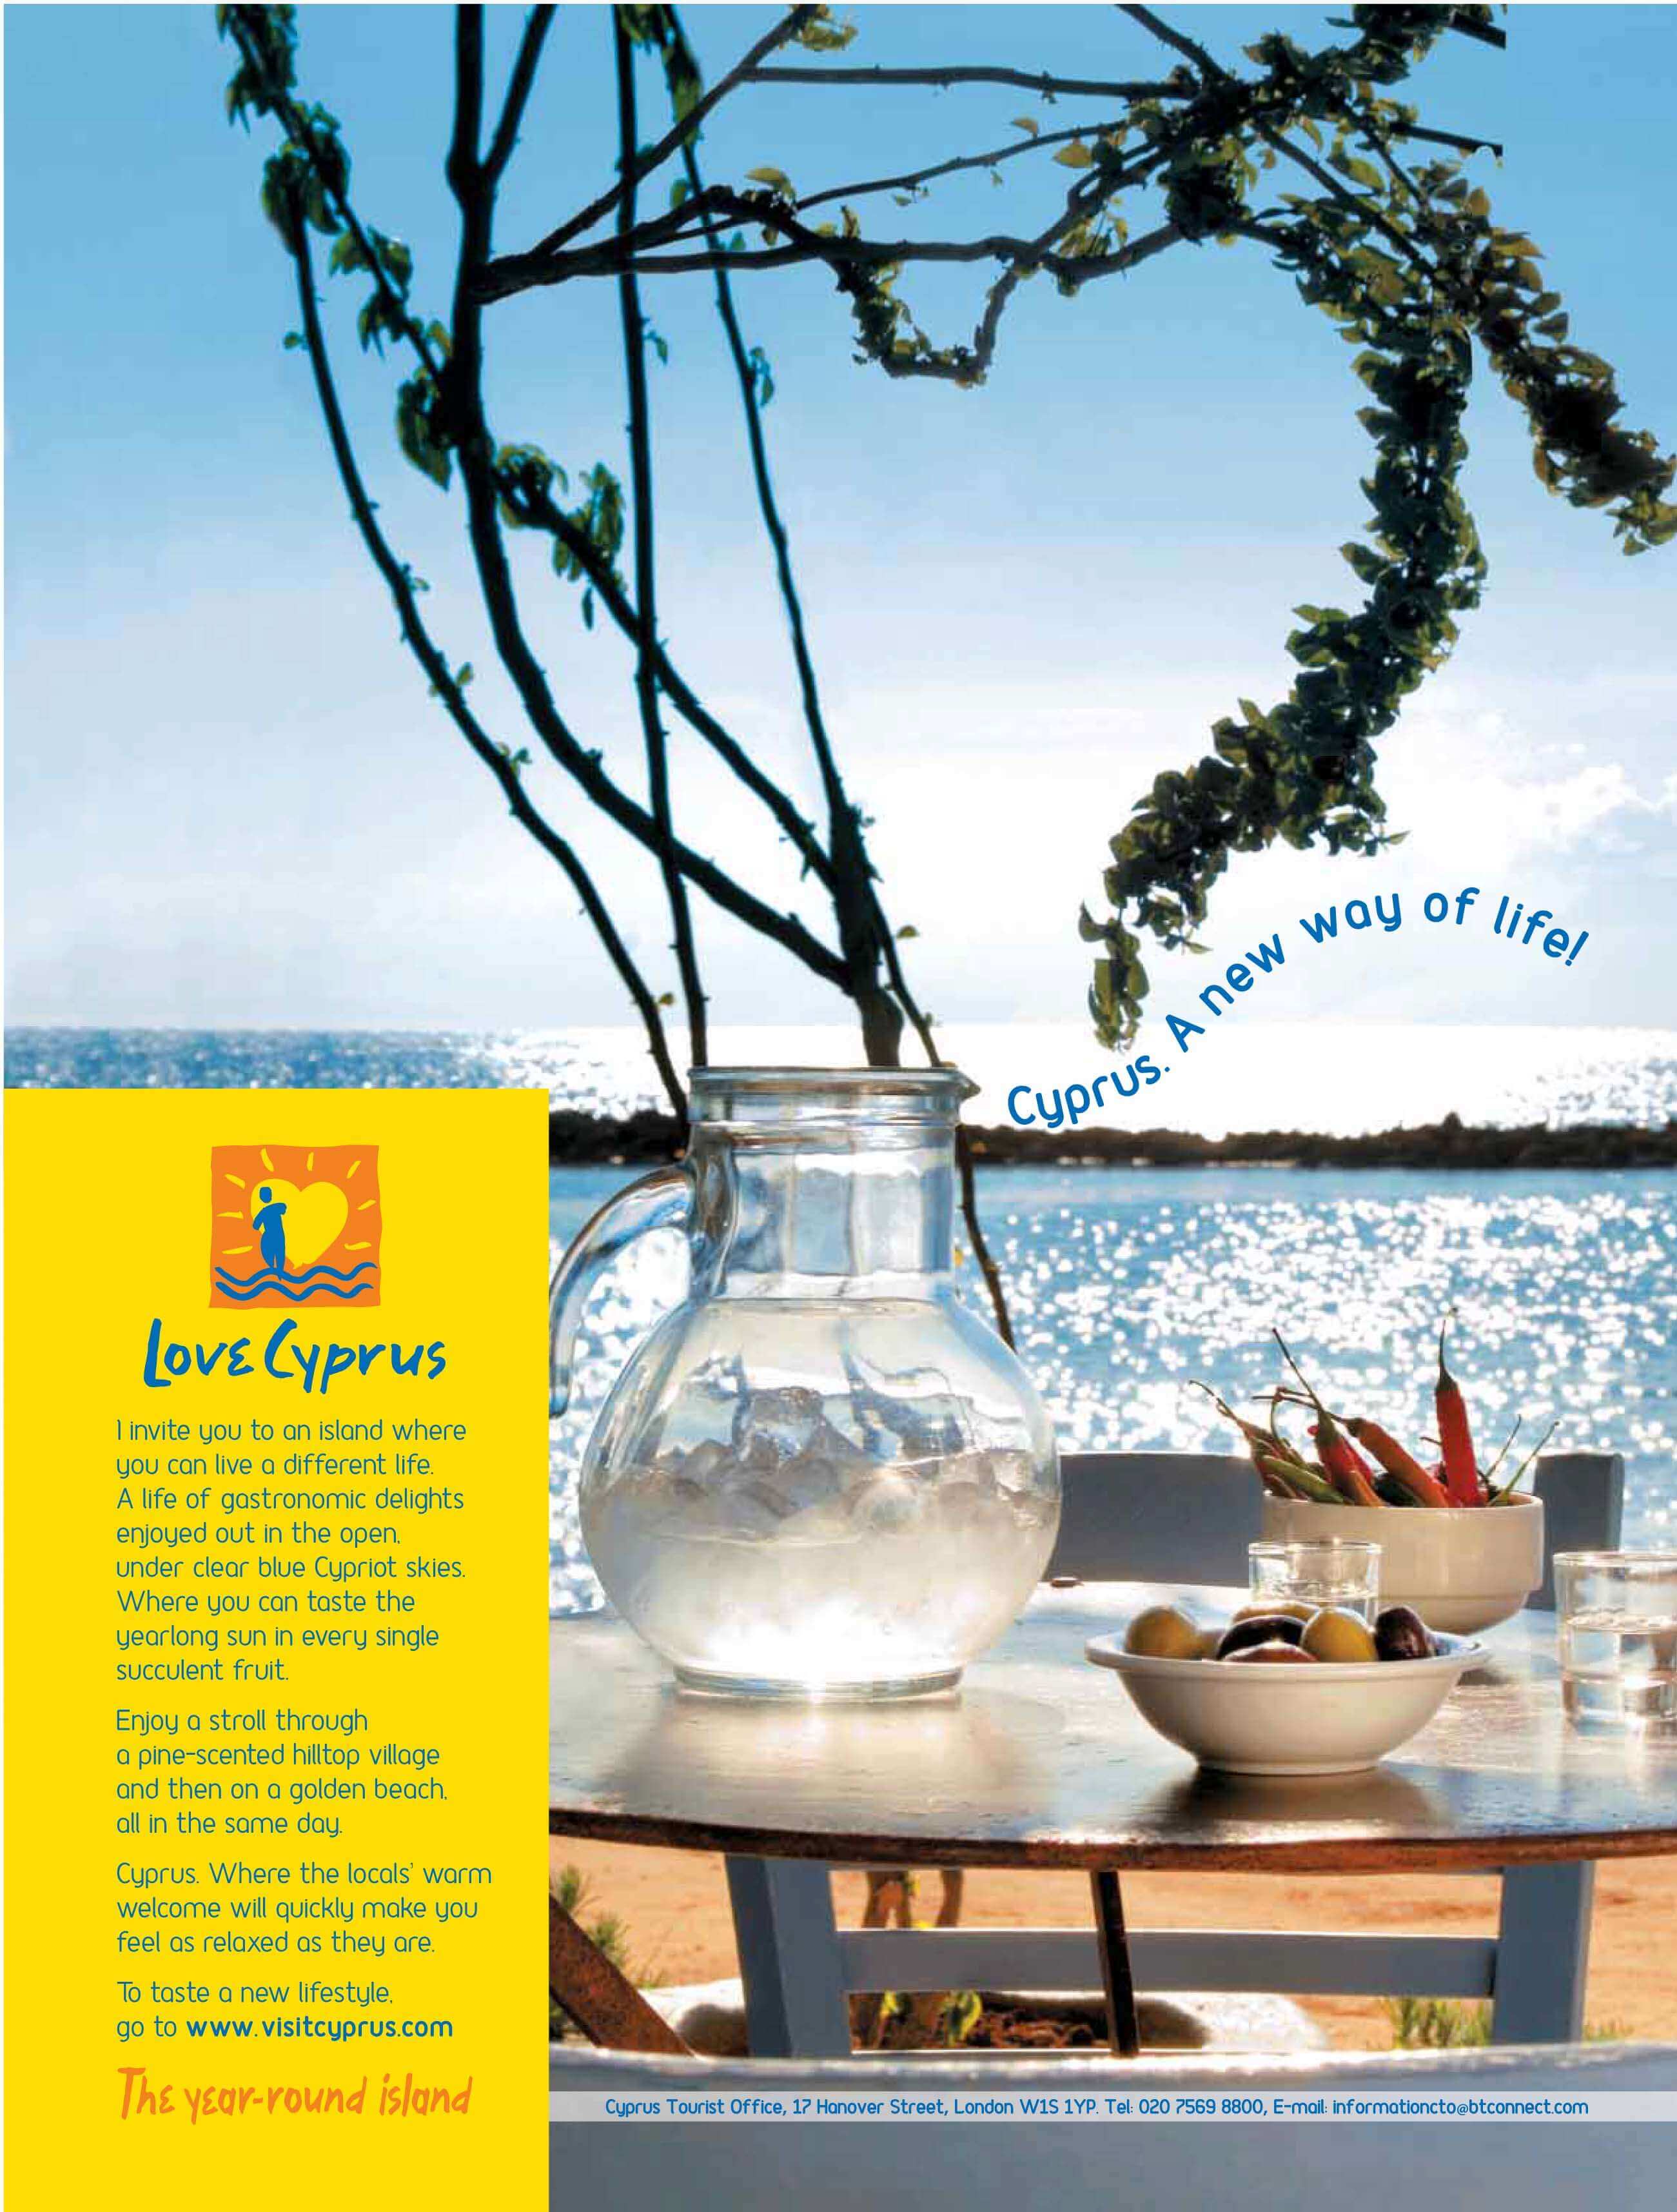 WORLD CAMPAIGN COT 2008 (CYPRUS TOURISM ORGANISATION)